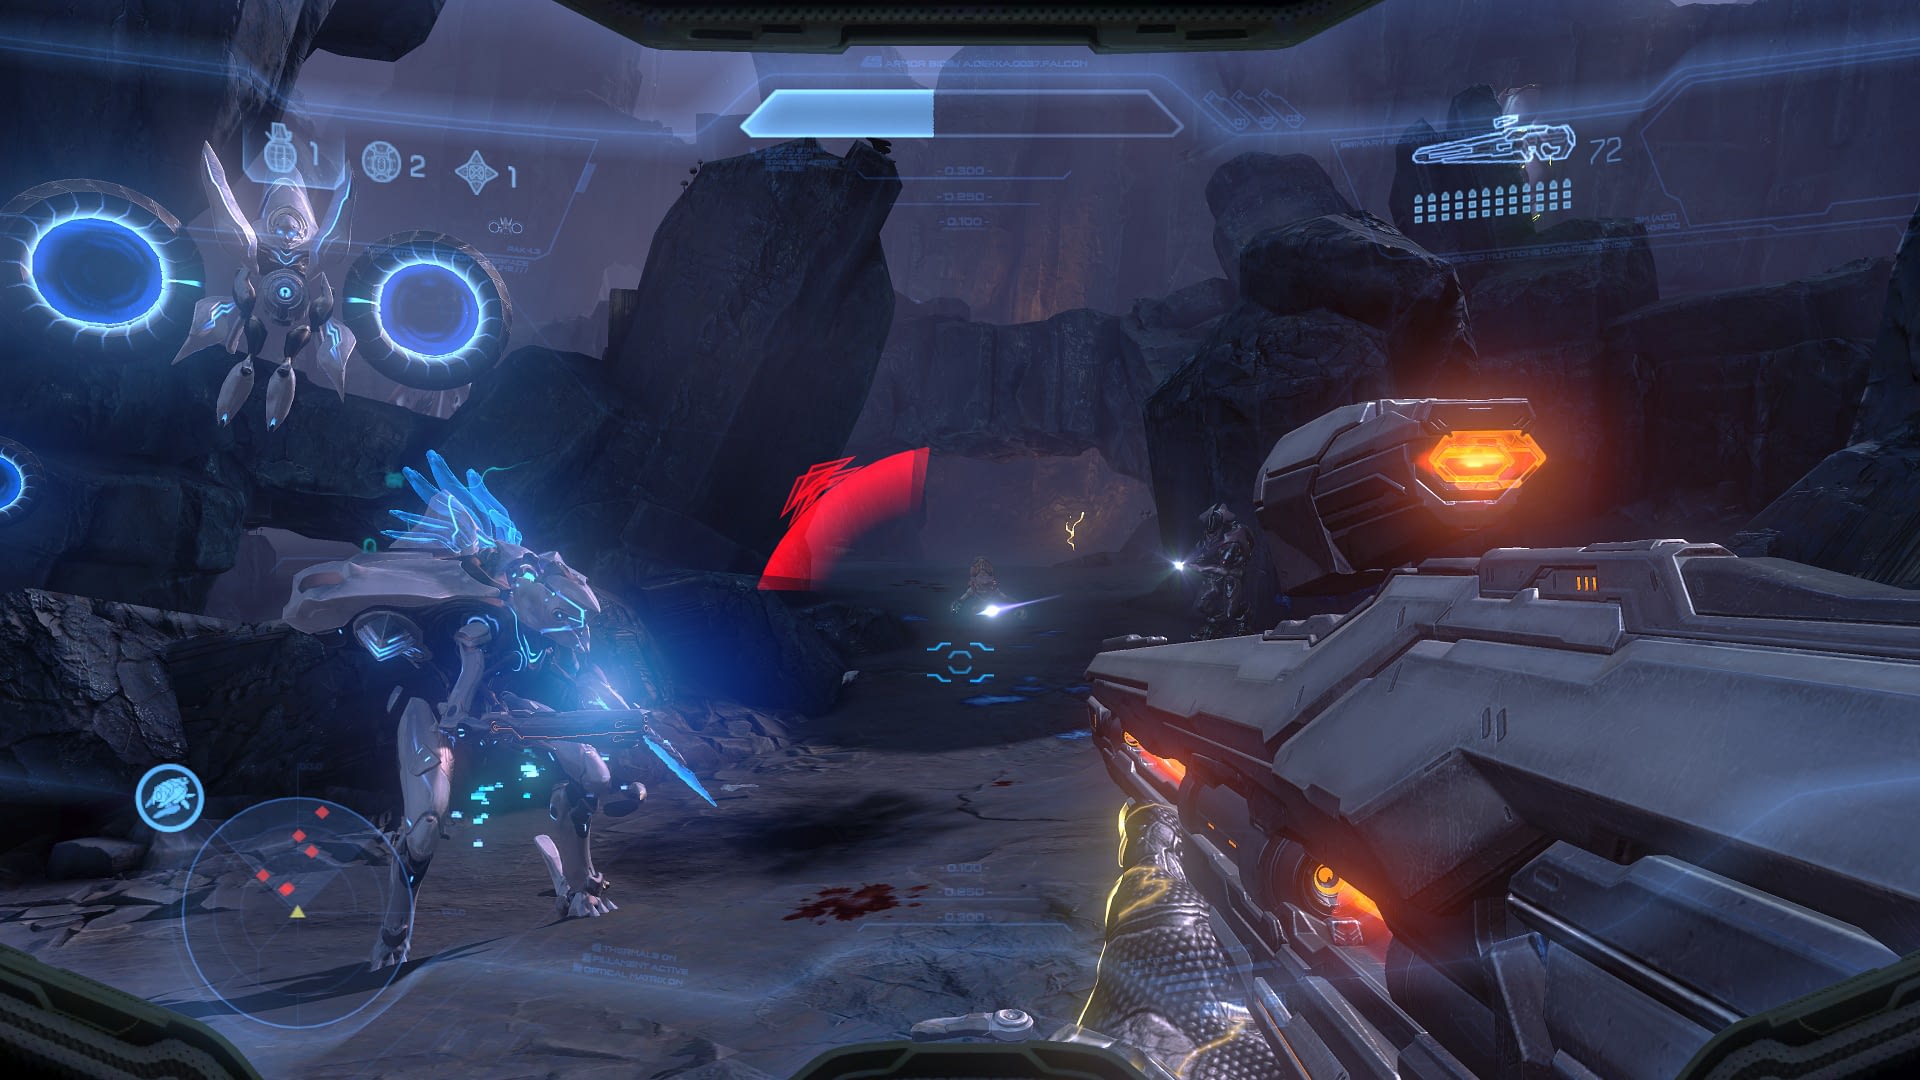 Halo 4: Five problems that 343 can improve in Halo 5 | GameZone